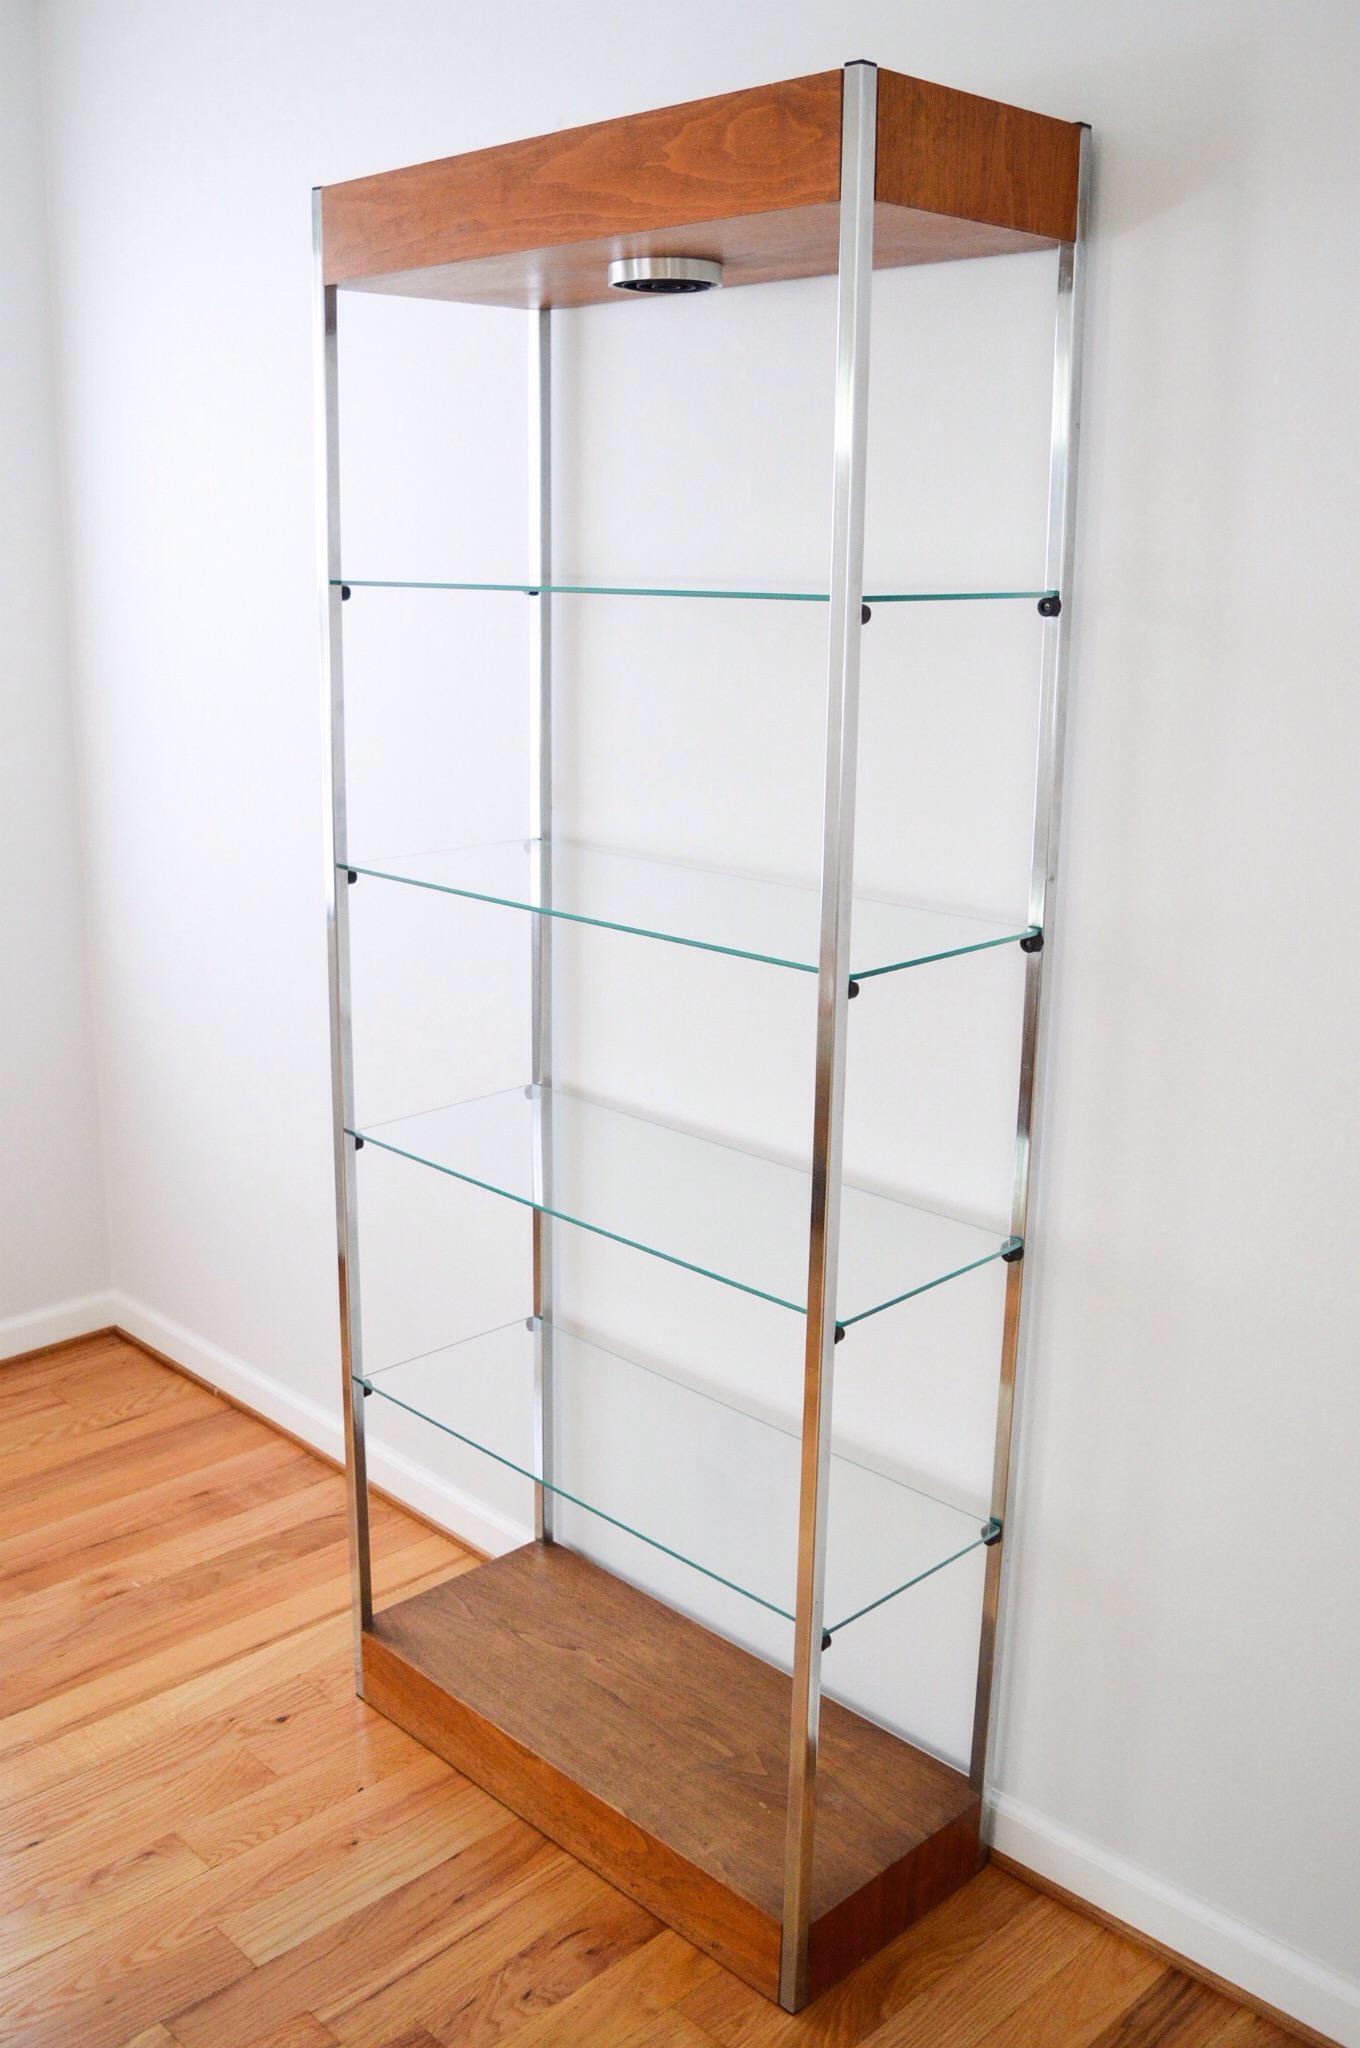 • Striking Mid-Century Modern lighted etagere or shelving unit, circa 1960.
• Classic modern minimalism with an elegant form and clean lines.
• Aluminum frame with a tall wood header and footer.
• Four removable glass shelves plus bottom wooden